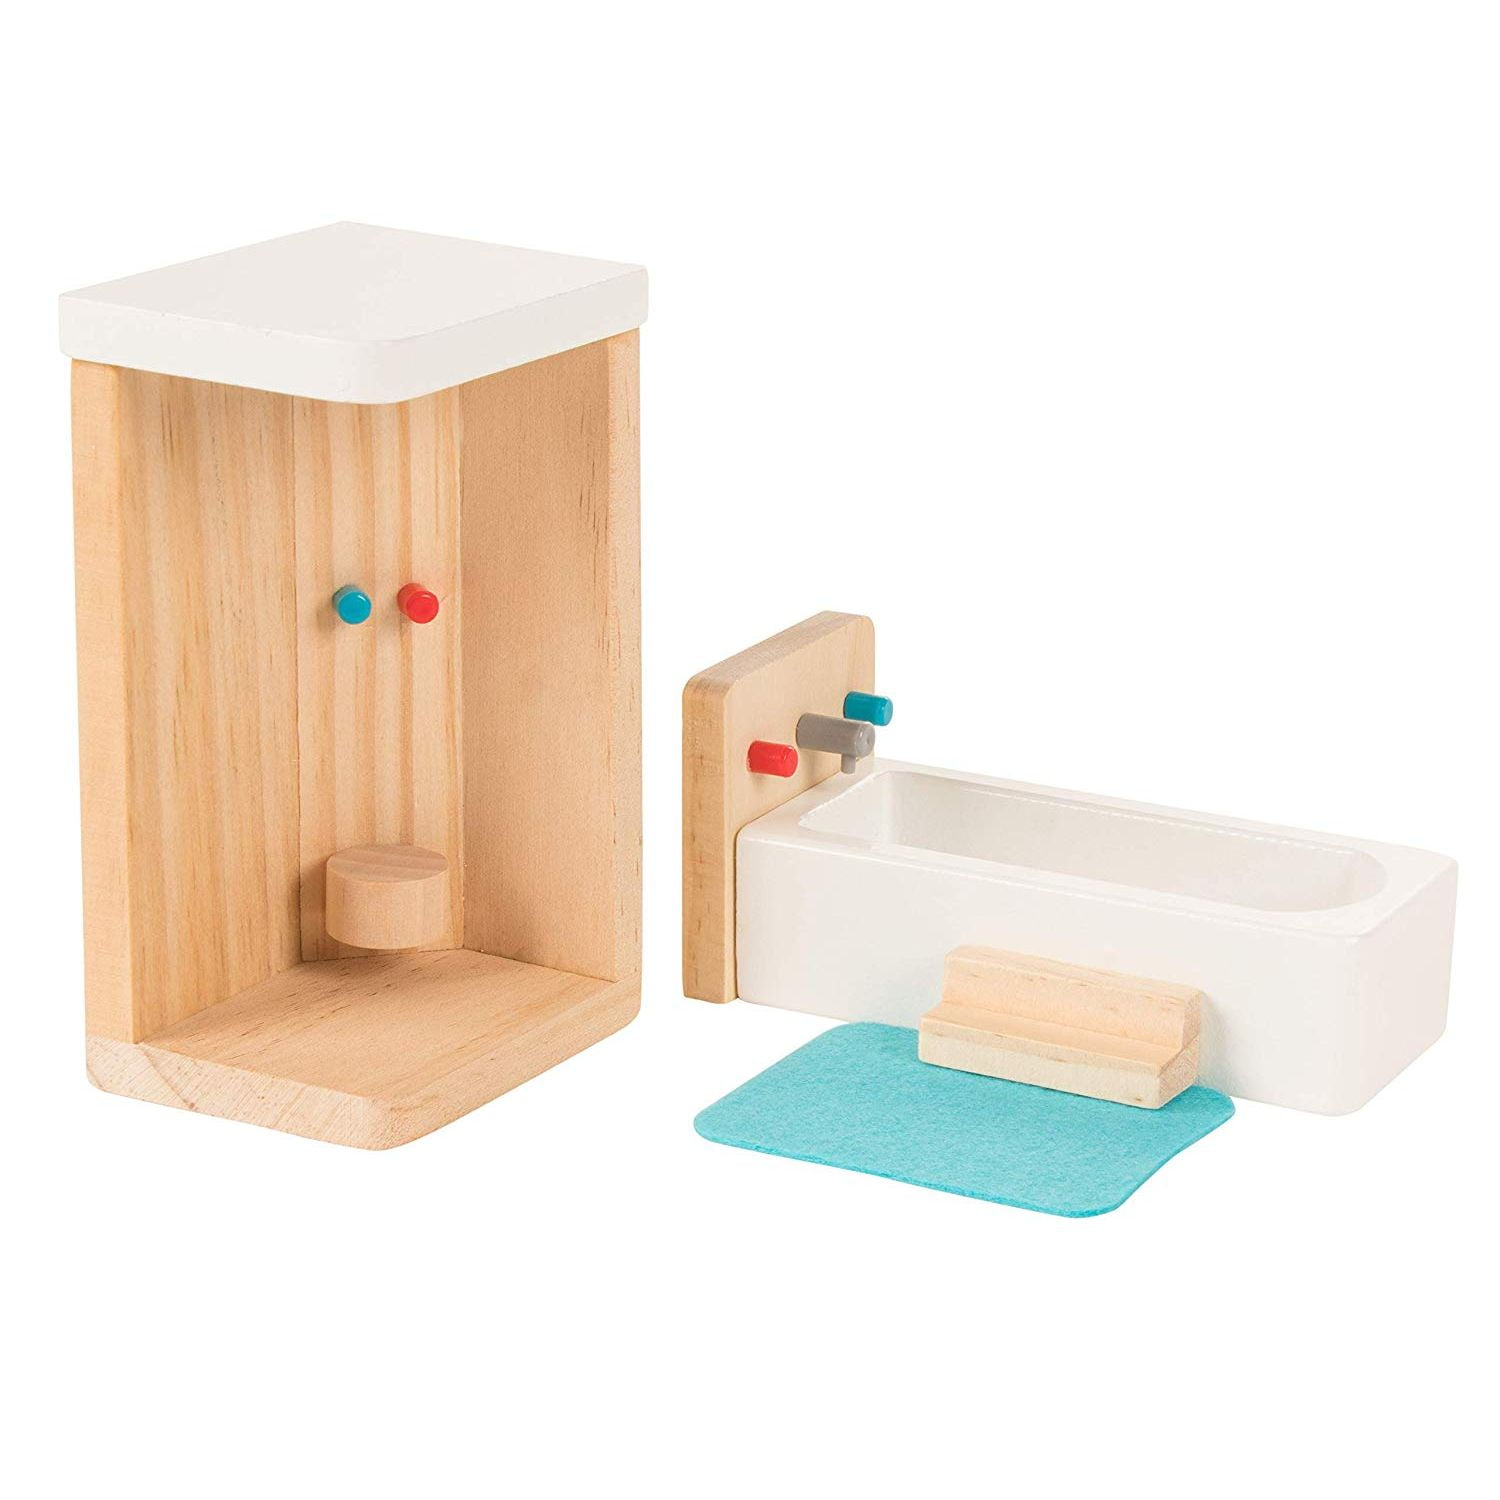 Pretend Play Miniature Playhouse Toys Bathtub 14-Piece Kids Wooden Doll House Accessories Juvale Bathroom Dollhouse Furniture Set with Shower Toilet